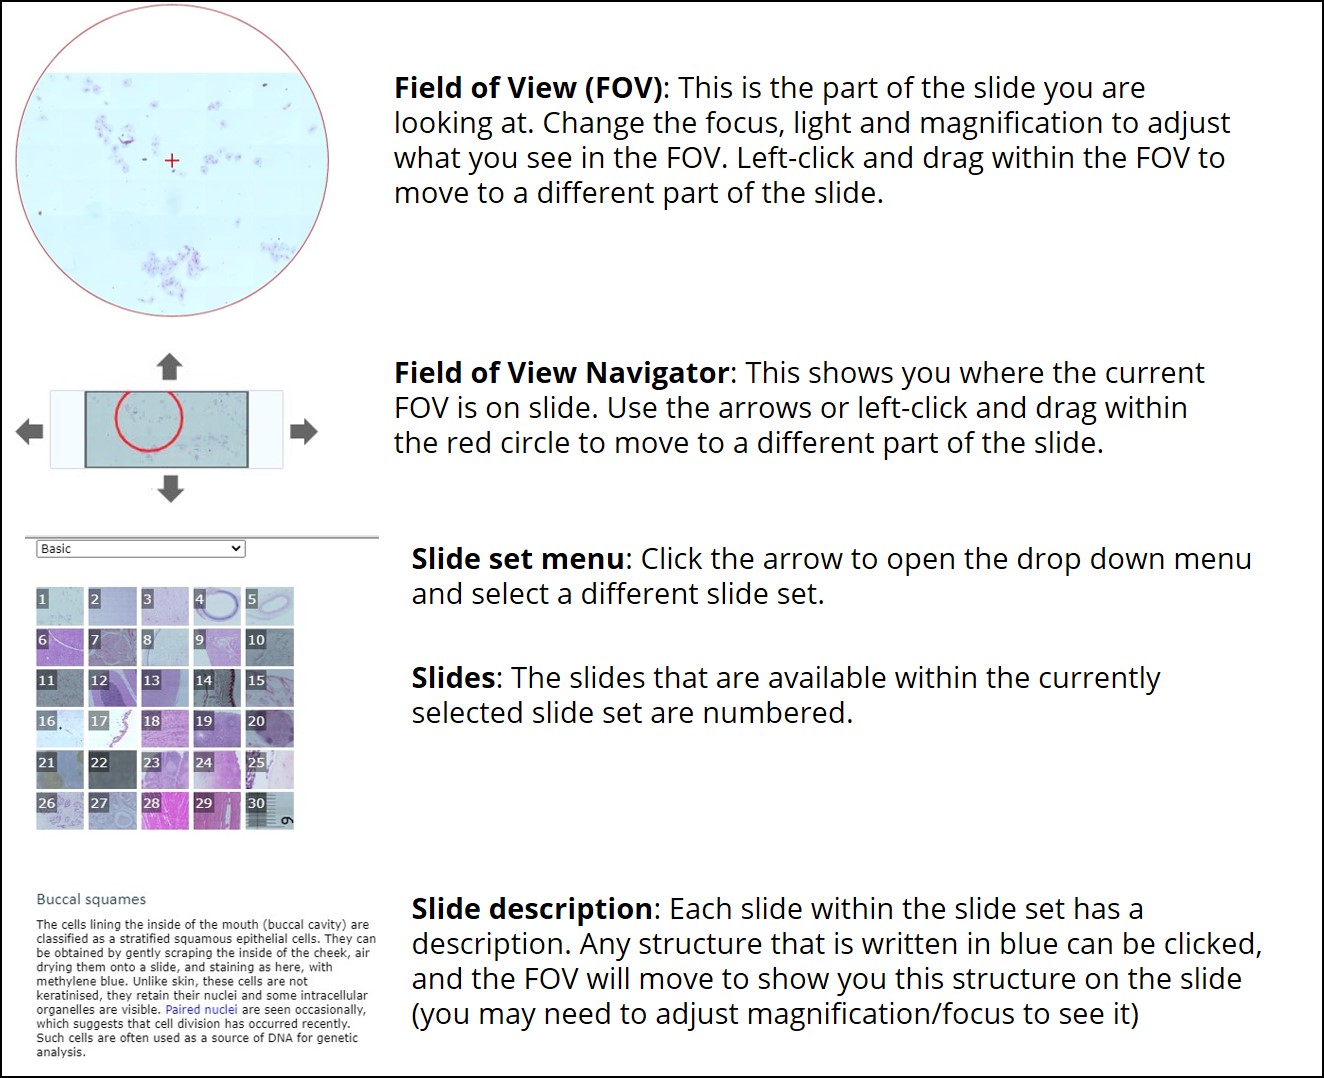 (2/2) An image of the Open Science Laboratory Virtual Microscope Legend showing the field of view, field of view navigator, slide set menu, slides, and slide description.